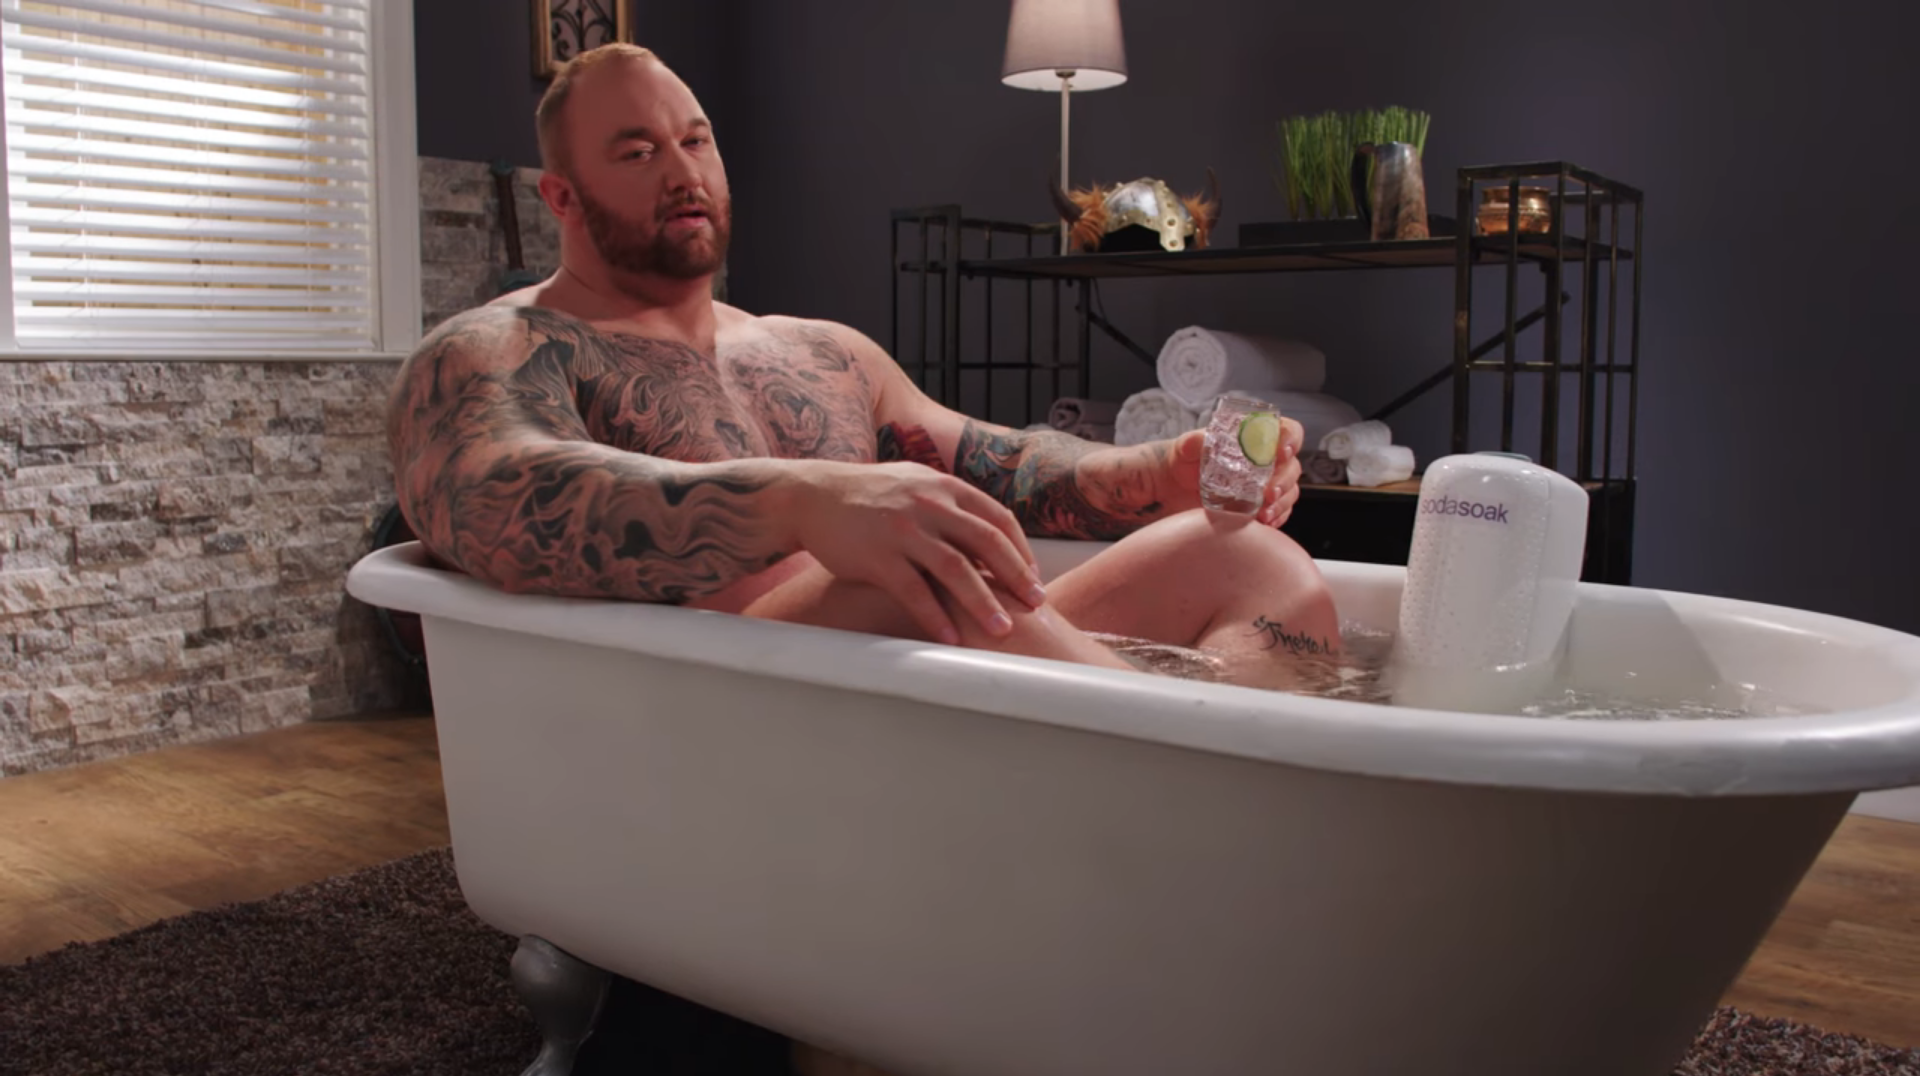 Tattooed man relaxing in a bathtub with a drink